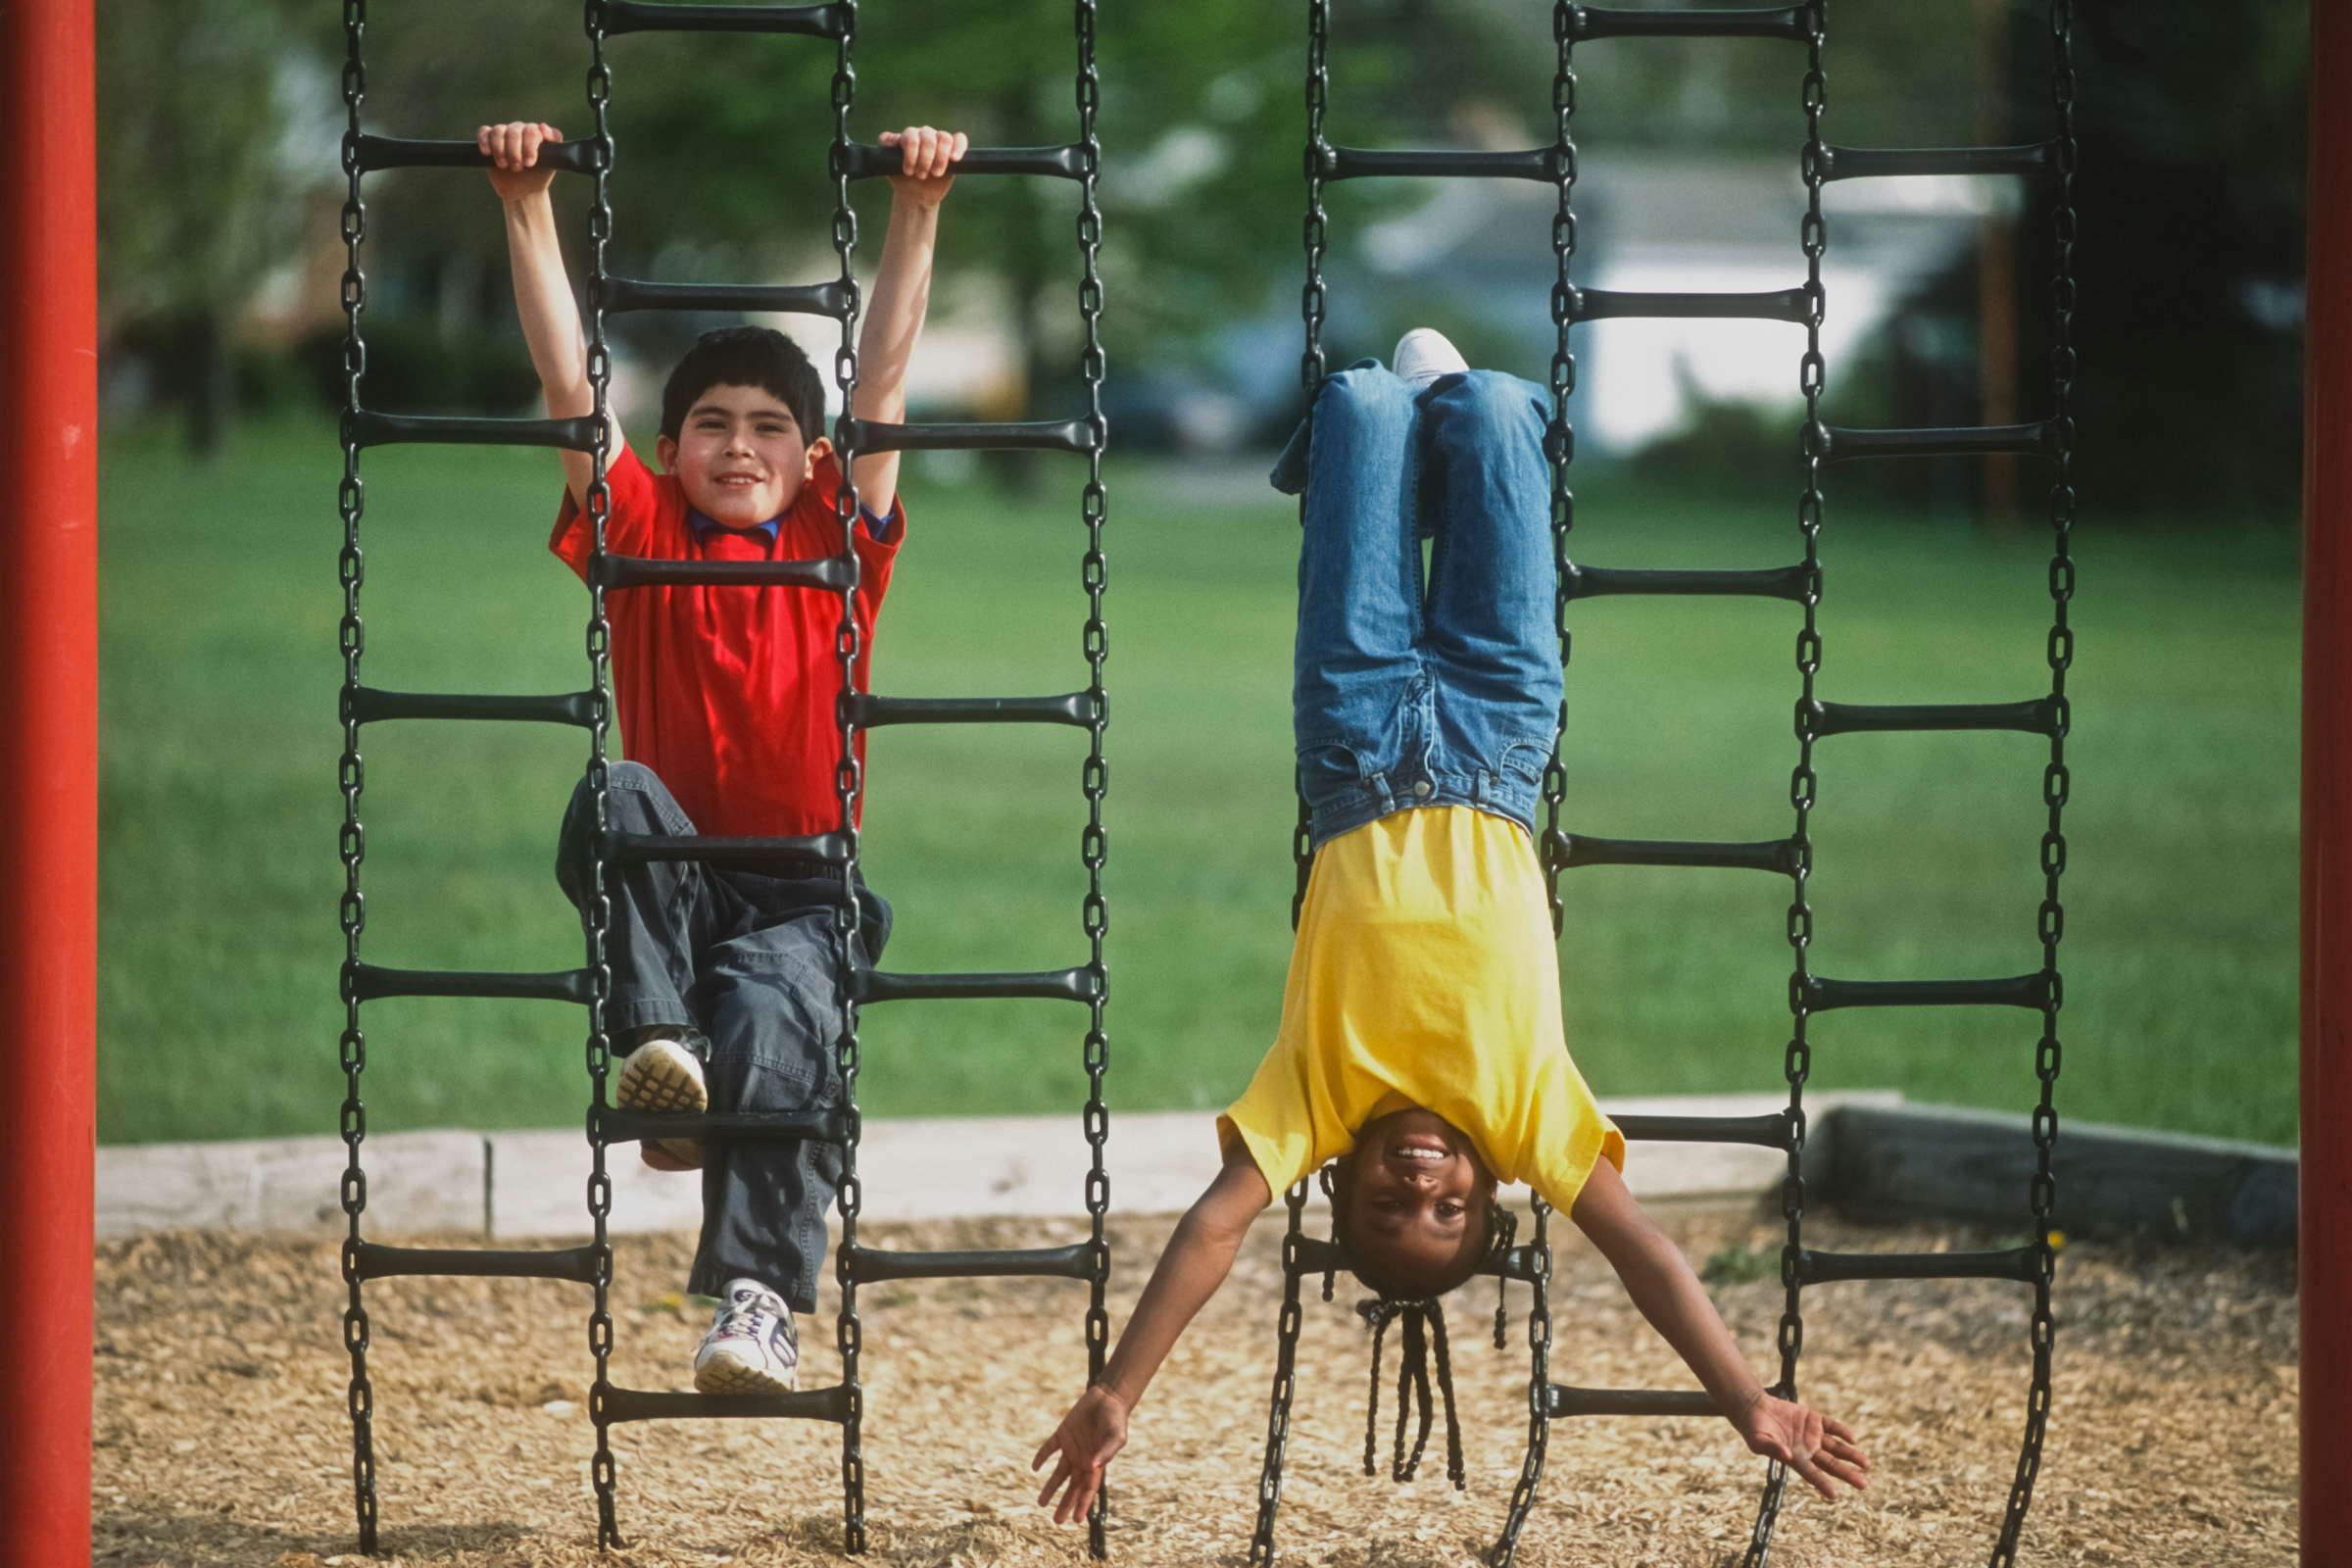 Girl and boy play on hanging structure on playground